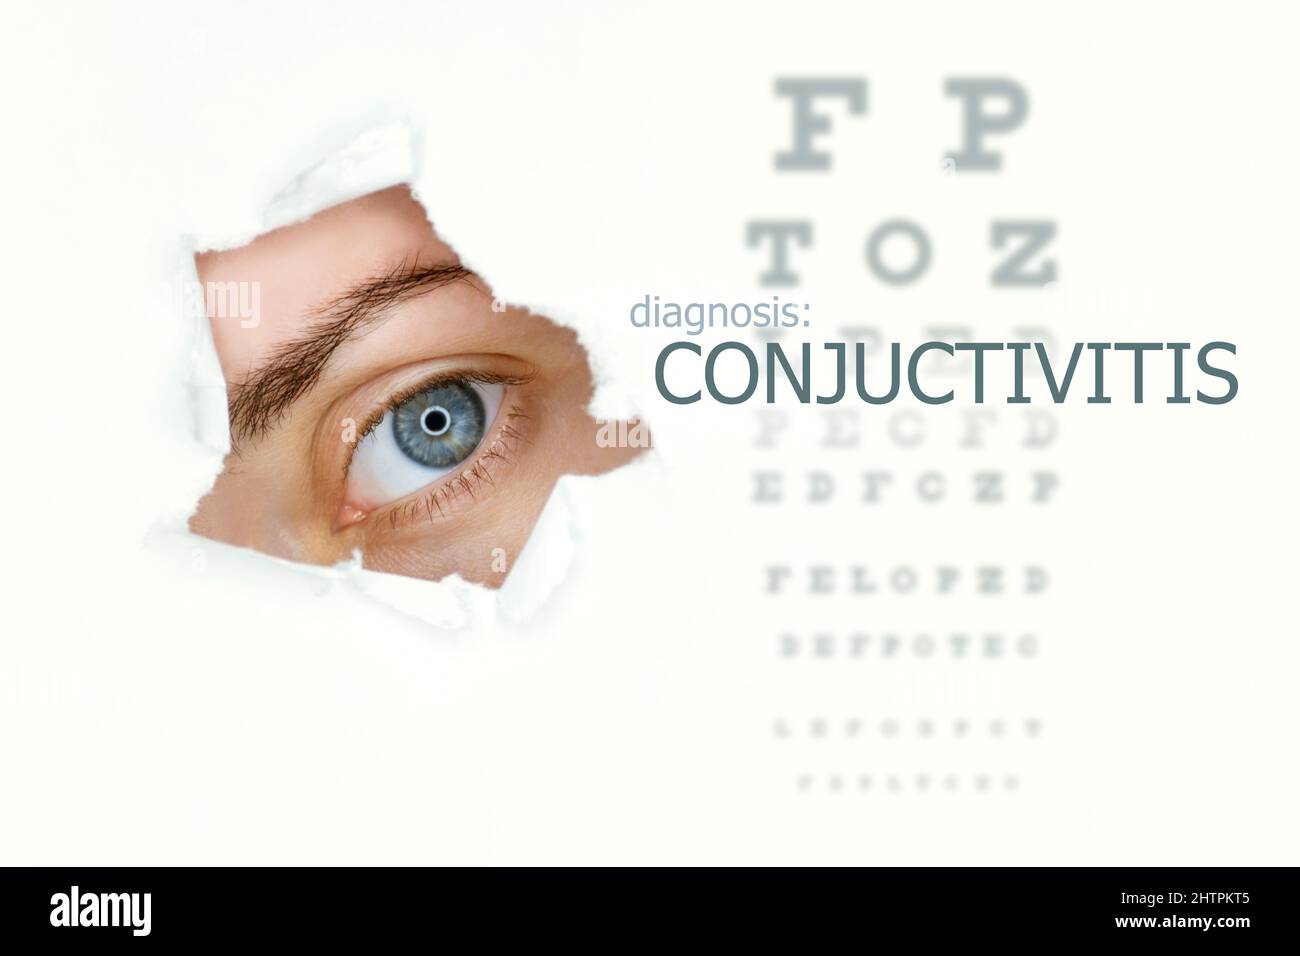 Conjuctivitis disease poster with eye test chart and blue eye. Isolated on white Stock Photo